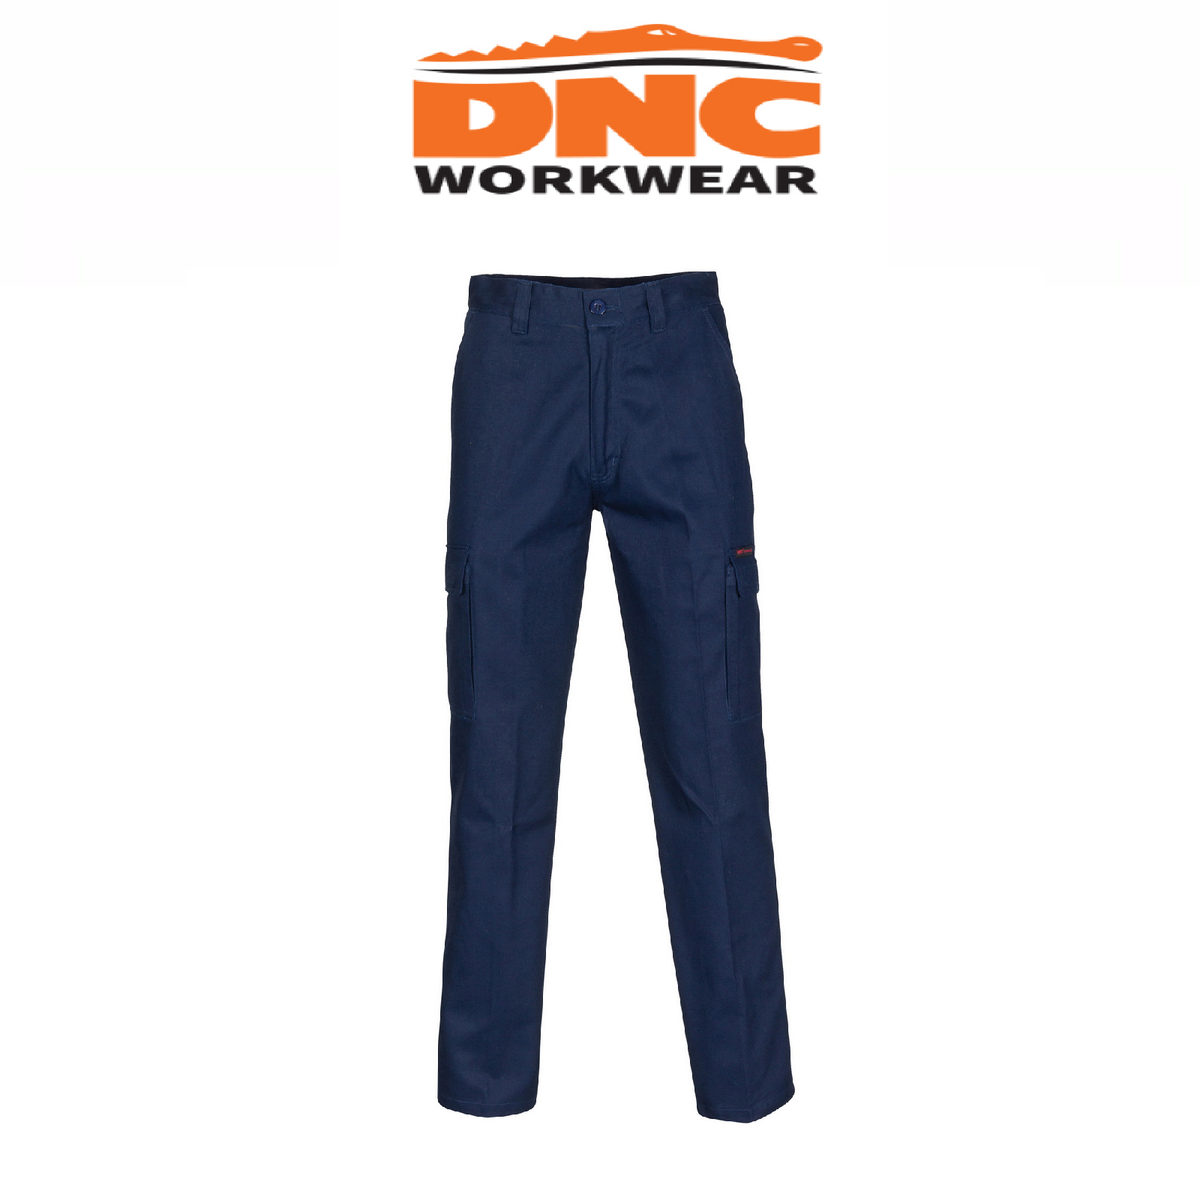 DNC Workwear Mens Middle Weight Cotton Double Slant Cargo Pants Work Casual 3359